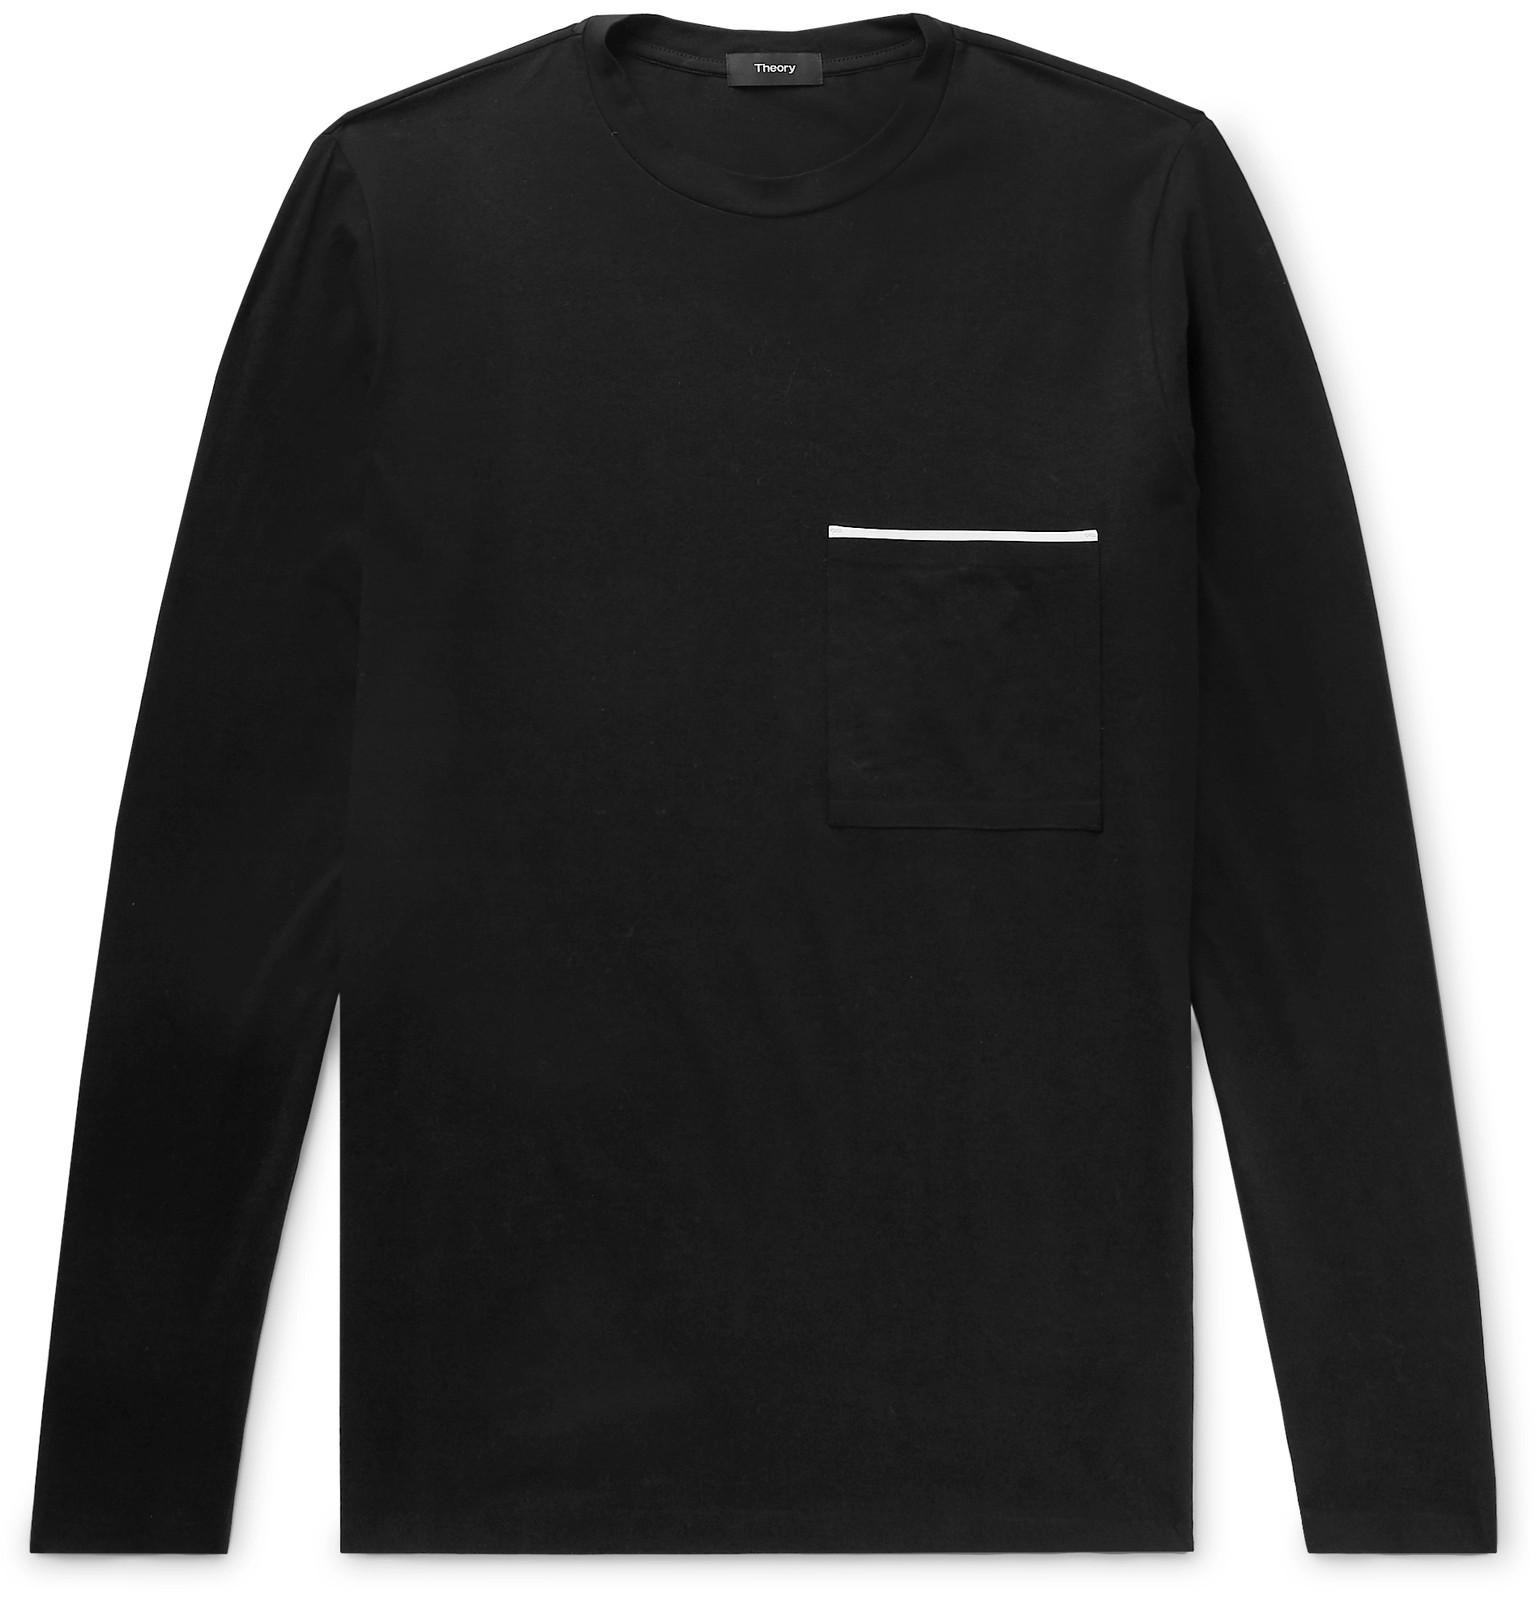 Lyst - Theory Cotton-jersey T-shirt in Black for Men